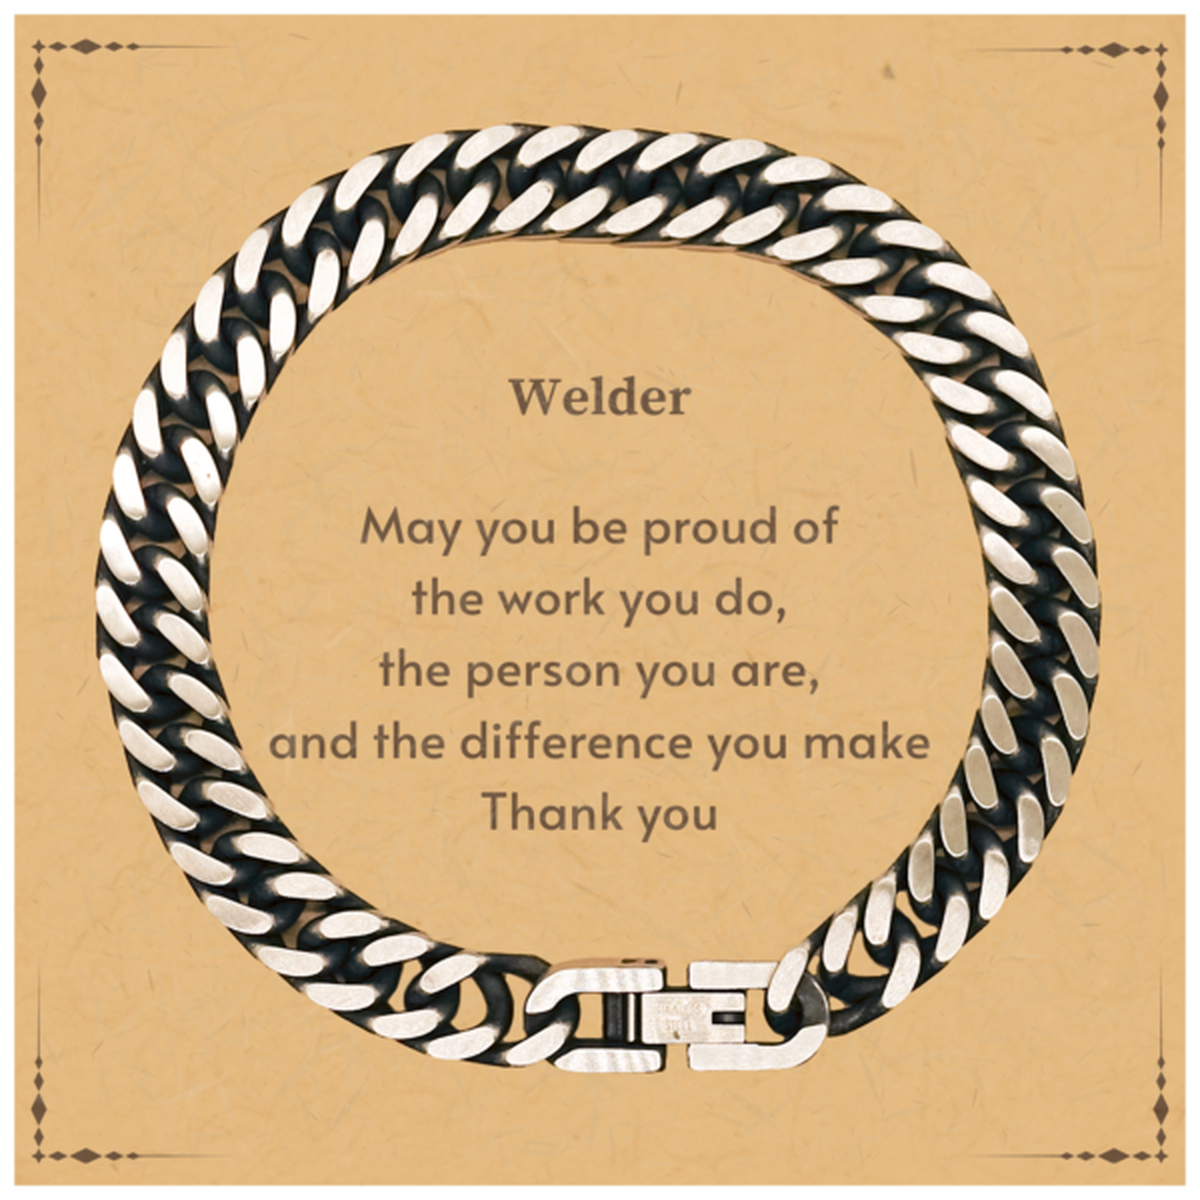 Heartwarming Cuban Link Chain Bracelet Retirement Coworkers Gifts for Welder, Welder May You be proud of the work you do, the person you are Gifts for Boss Men Women Friends